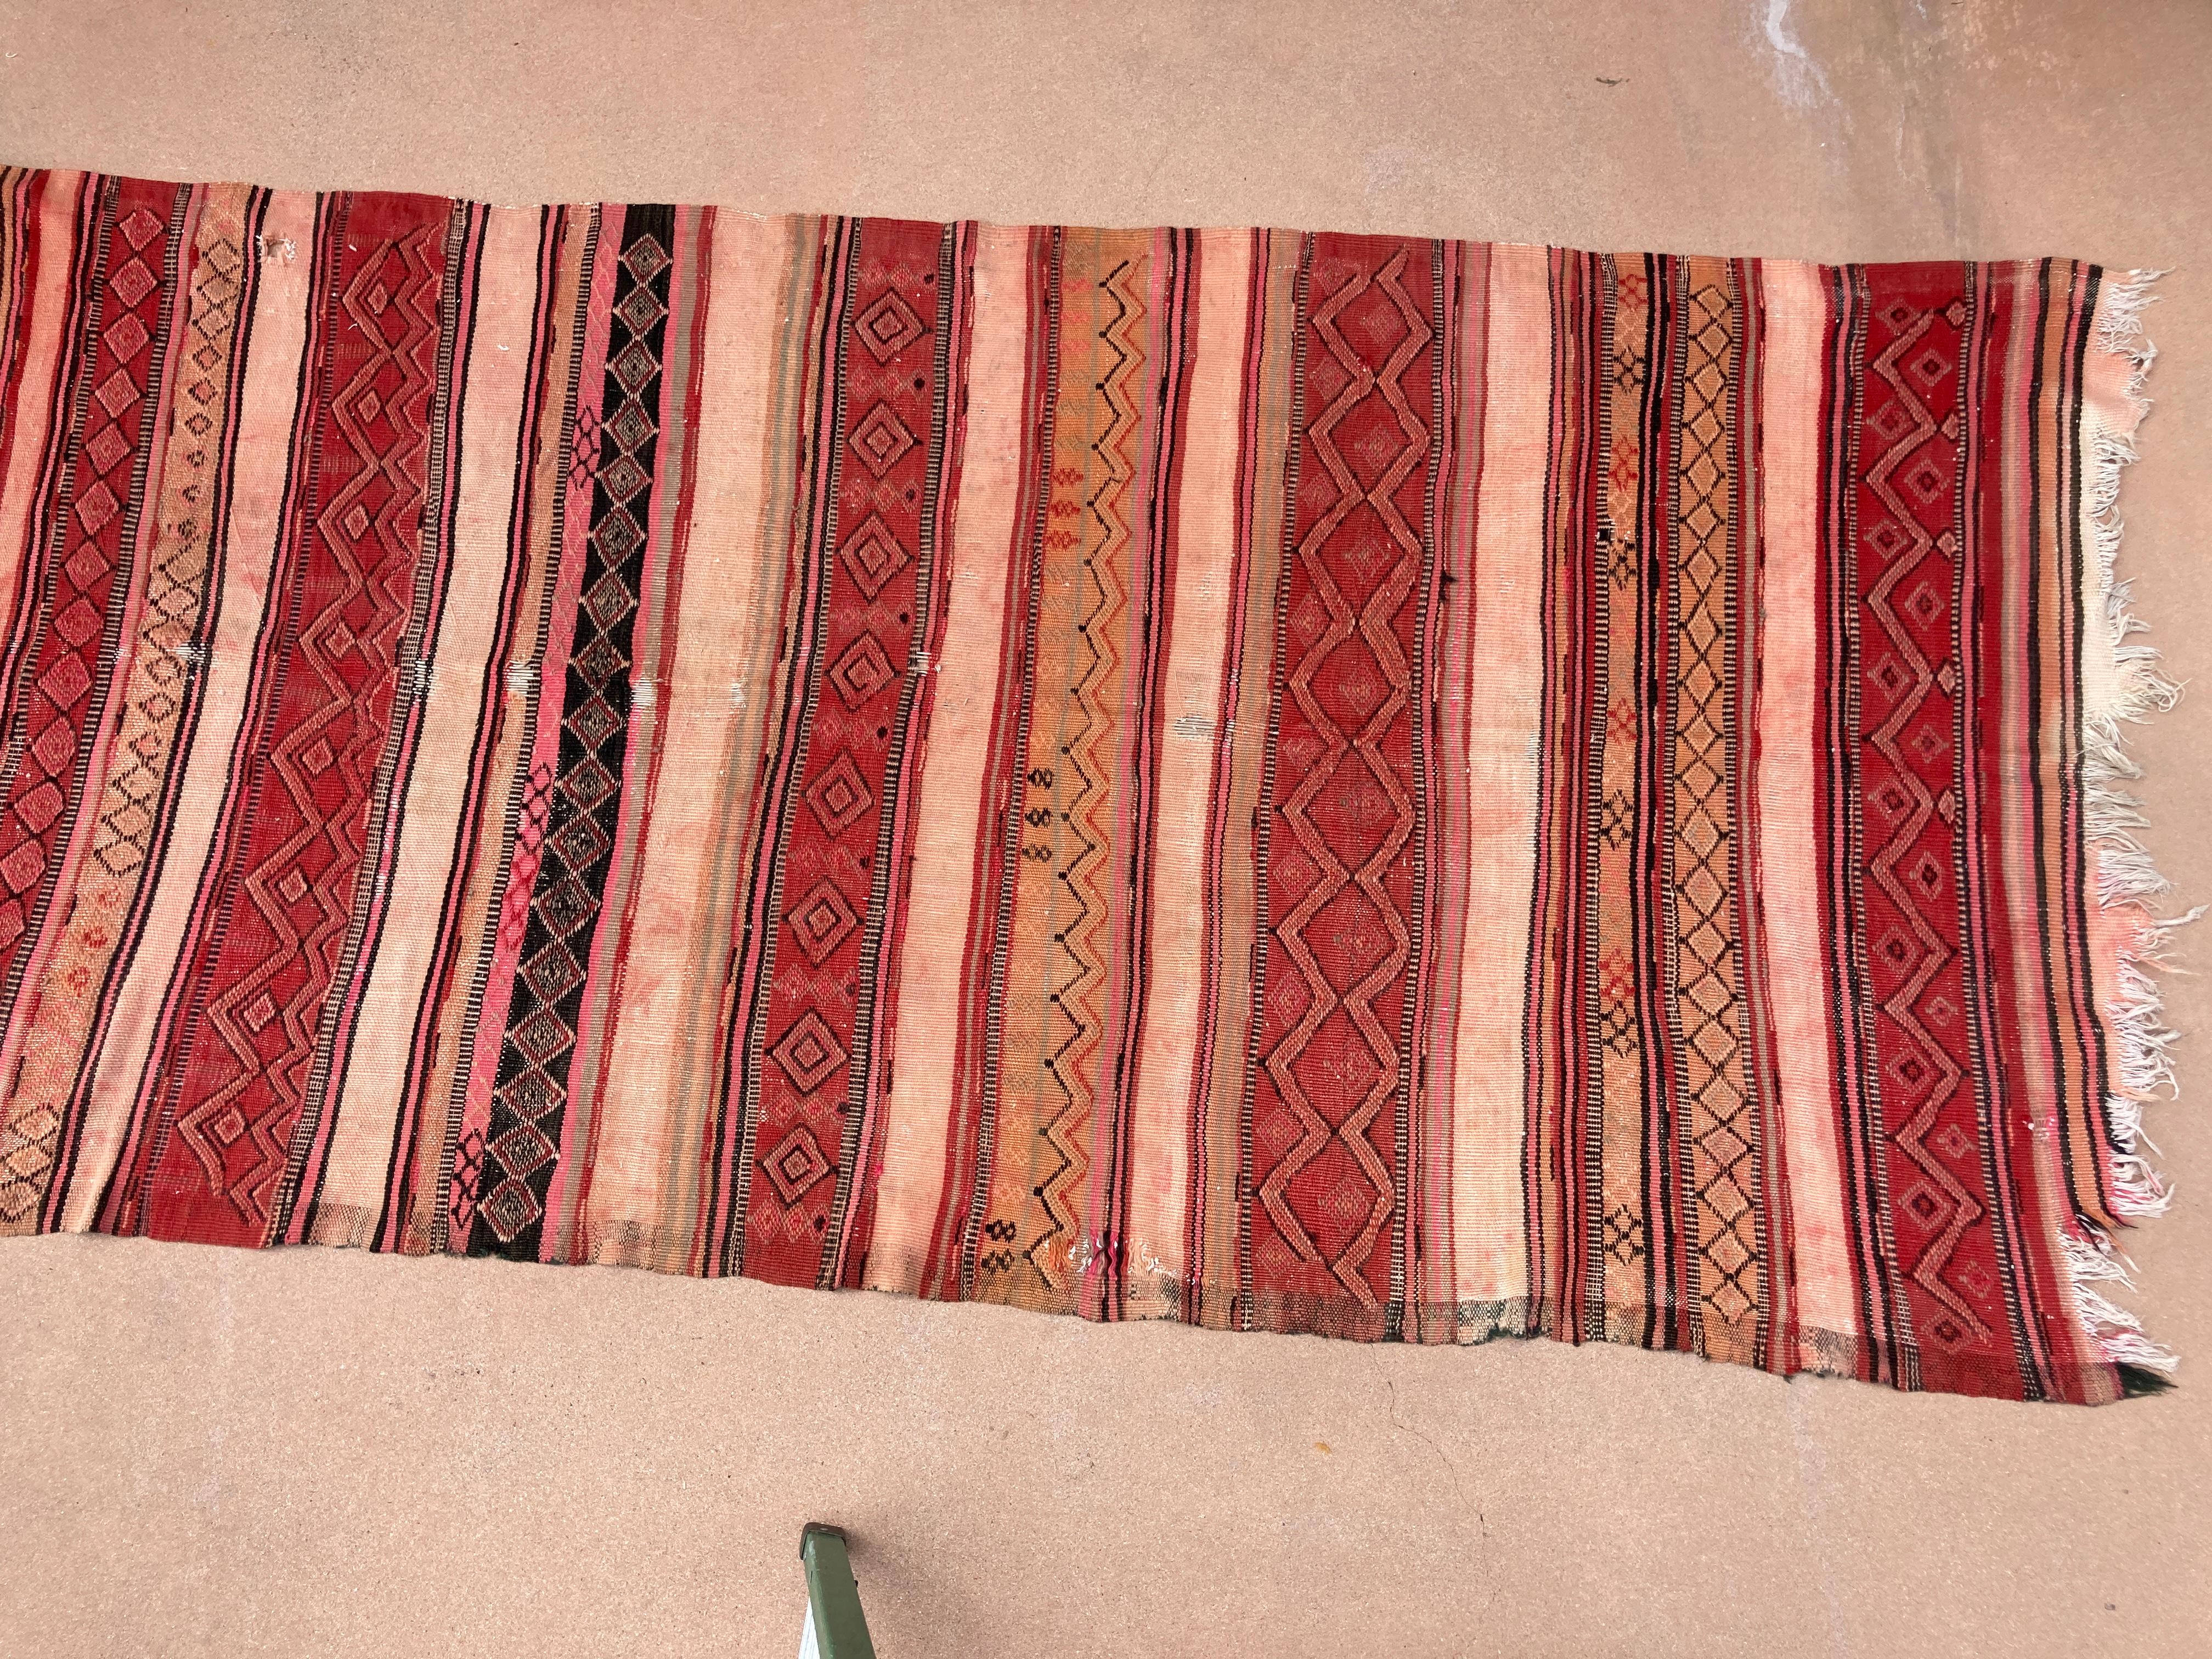 Large handwoven vintage Moroccan Berber Tribal kilim rug, nicely aged with washed out cors.Handwoven by the Berber tribes in south Morocco with traditional geometric tribal designs.South of Marrakech floor covering runner.Great Moroccan vintage